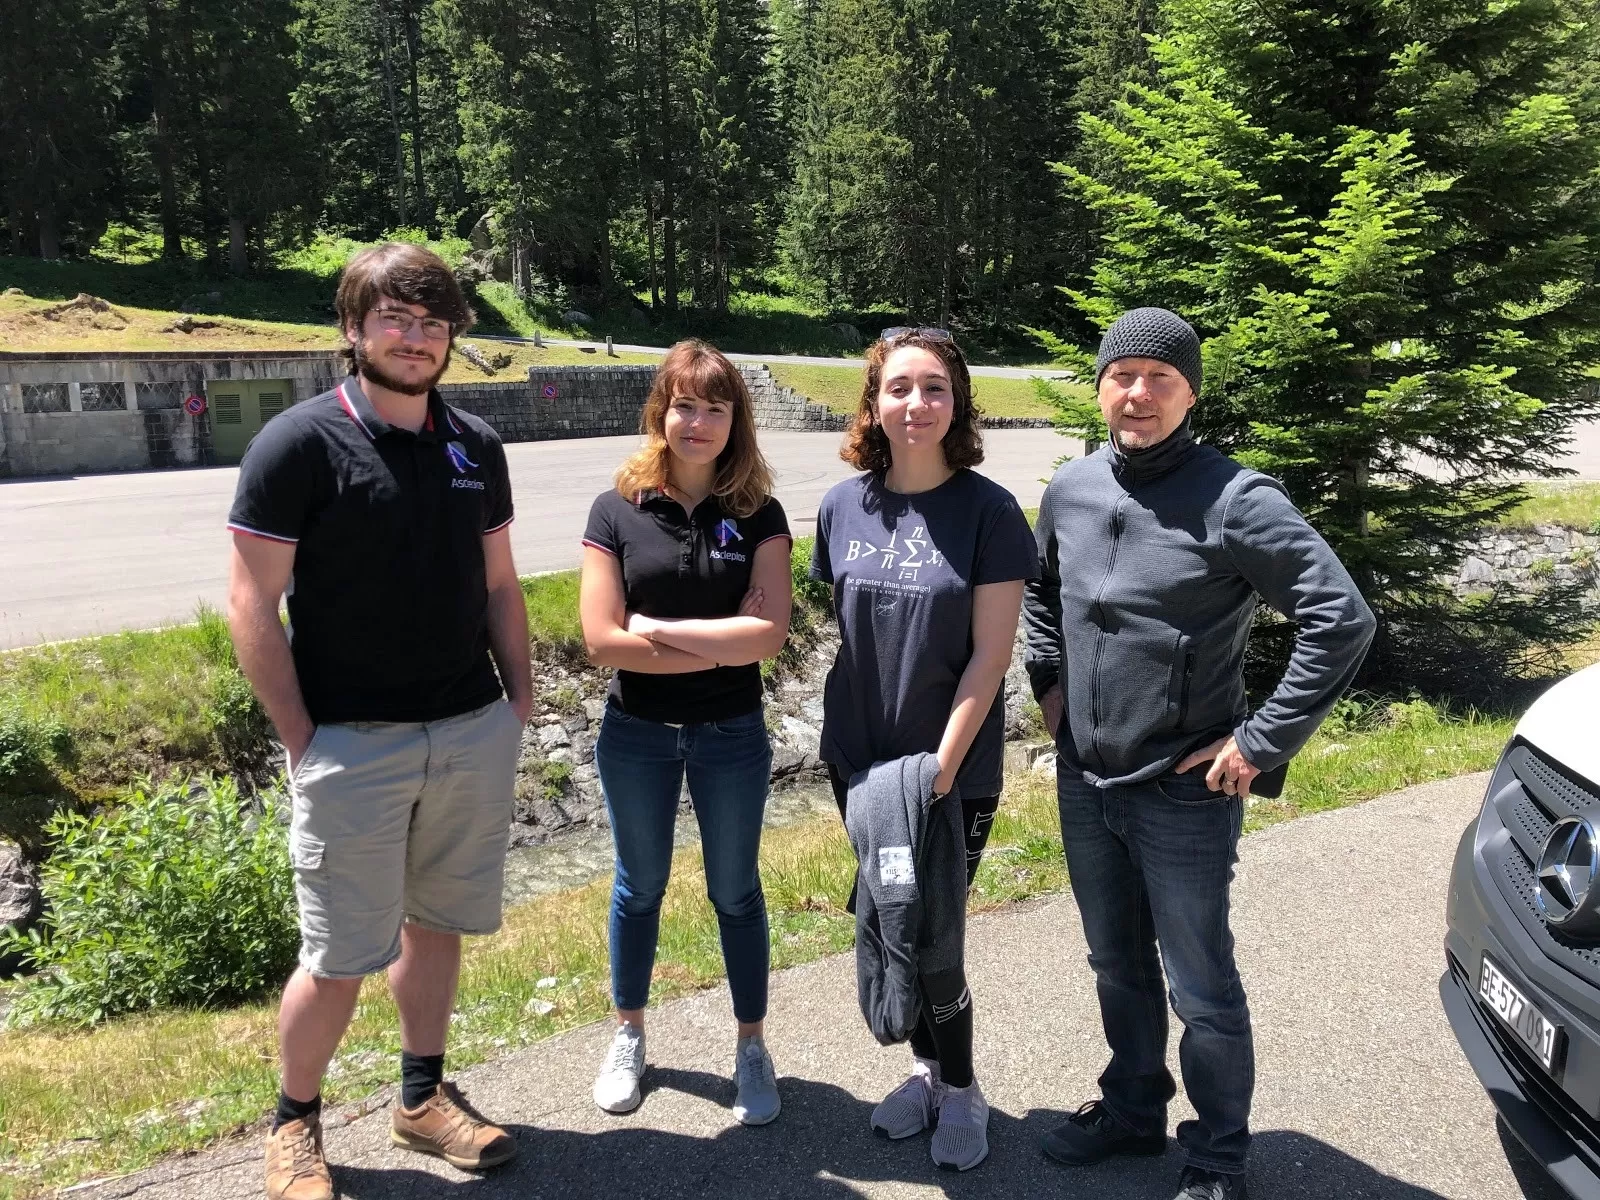 Asclepios project members Théodore Bellwald, Chloé Carrière and Somaya Bennani with Ingo Blechschmidt, Head of the Grimsel Test Site, at their first visit to the research facility (from the left).